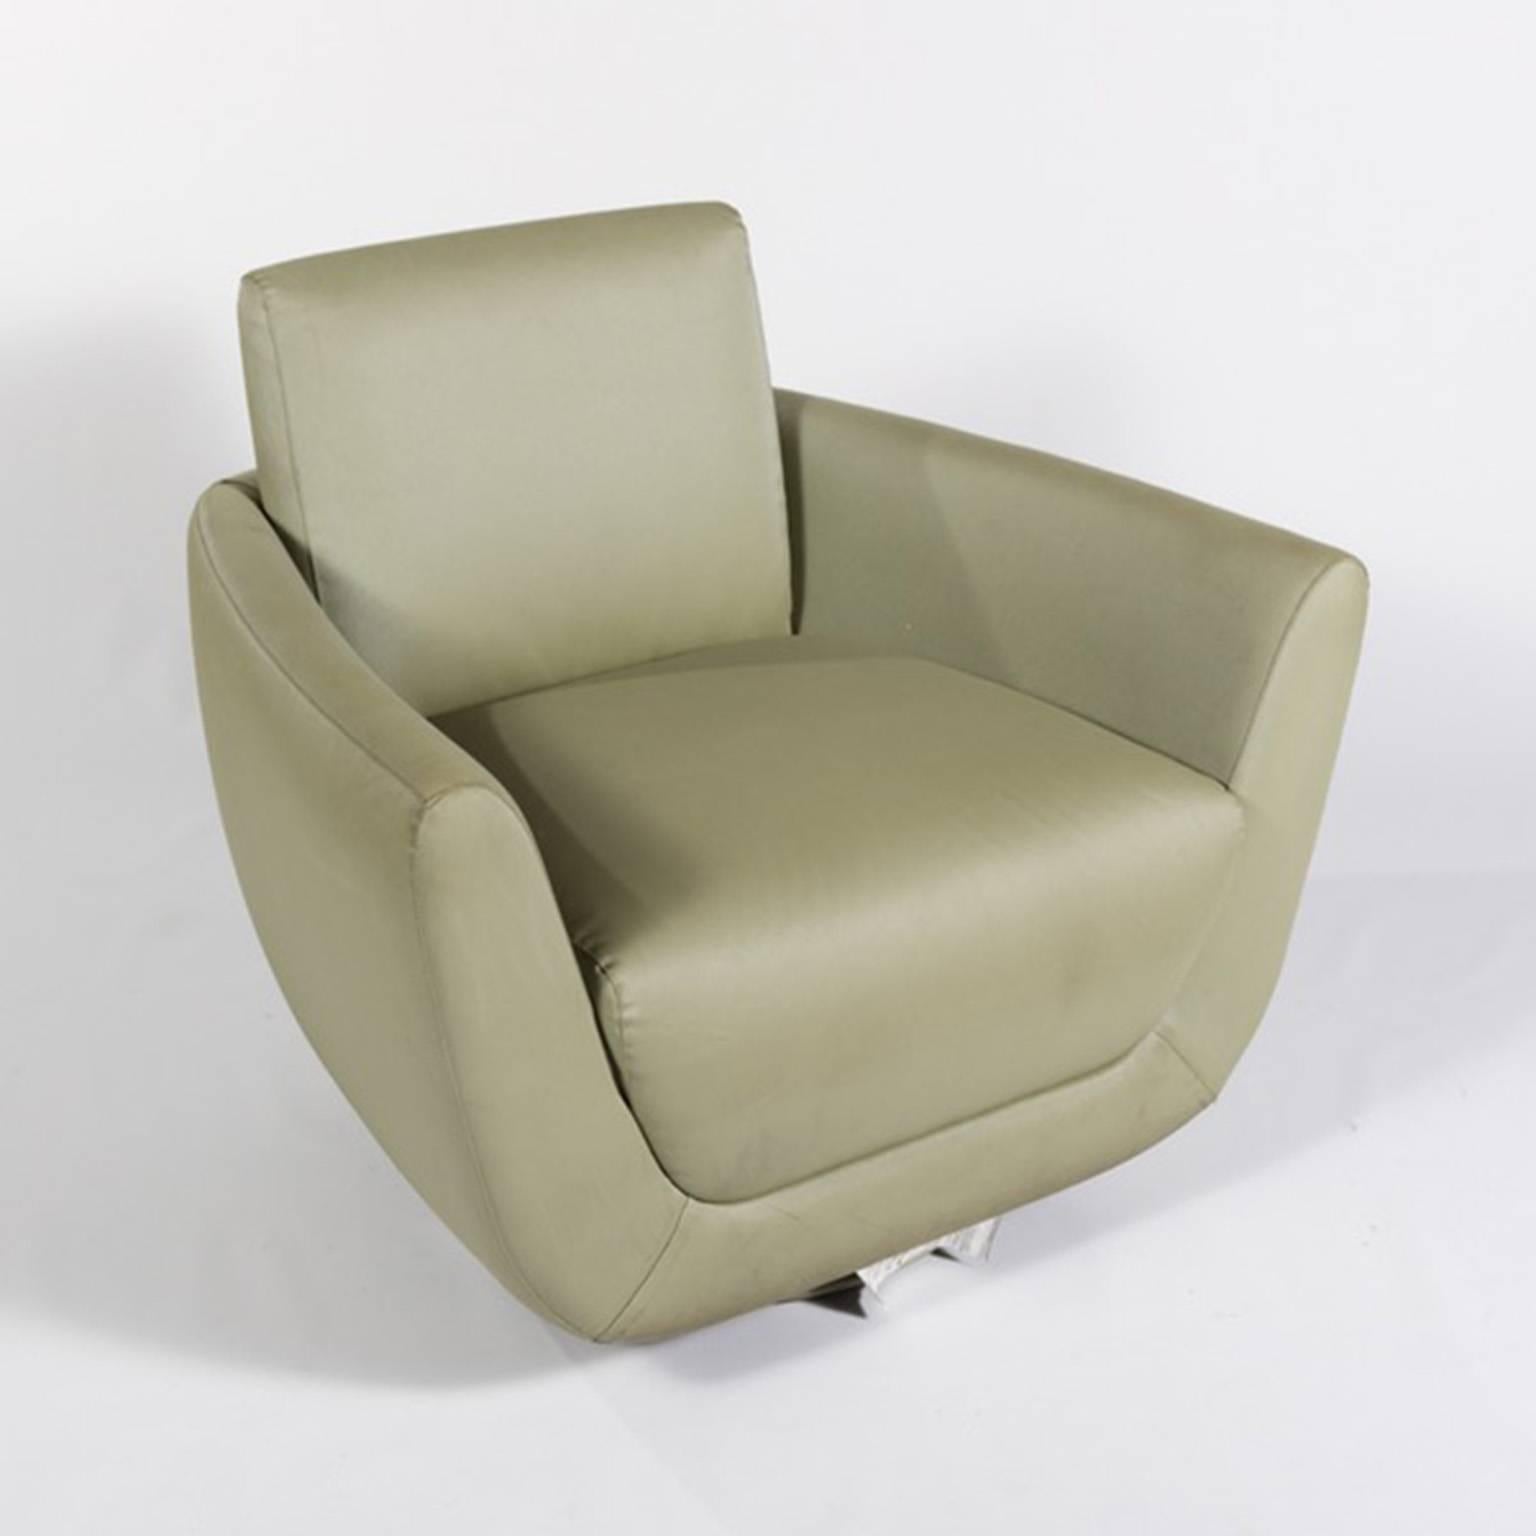 Canadian Chic Pair of Mid-Century Celery Green Swivel Chairs For Sale